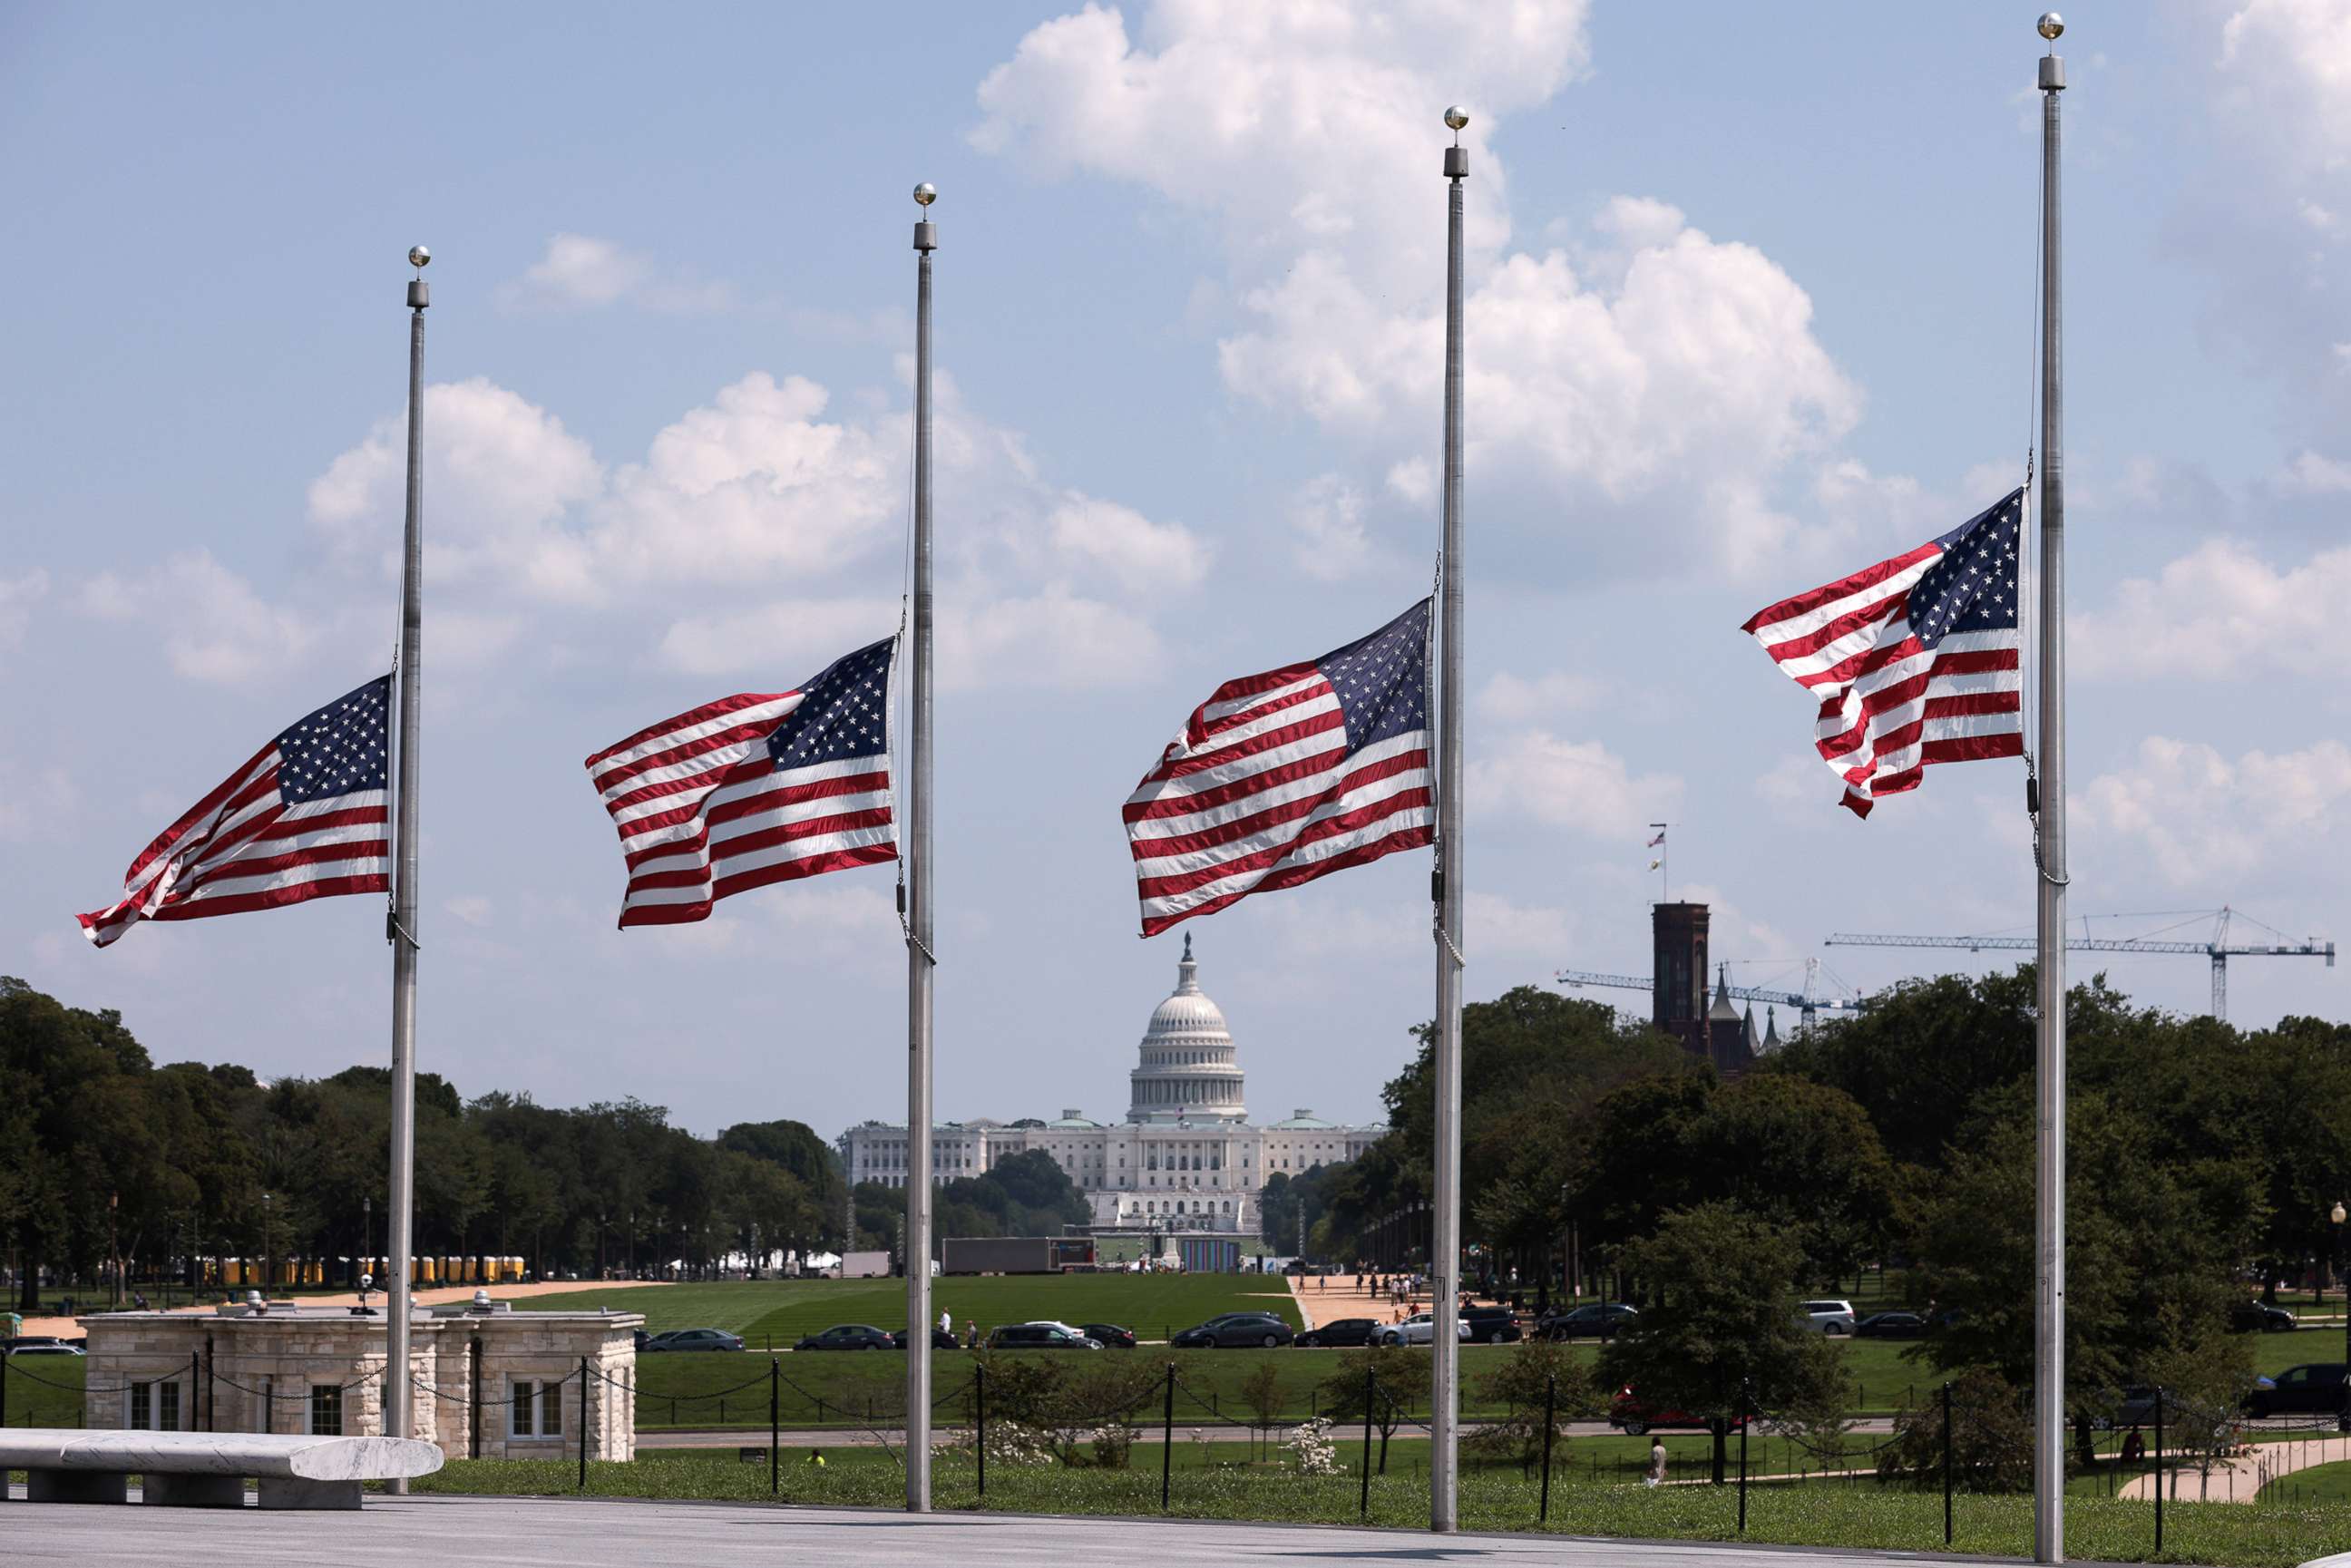 PHOTO: Flags encircling the Washington Monument fly at half staff a day after the death of U.S. service members in an attack in Kabul, Afghanistan, Aug. 27, 2021, in Washington, D.C.